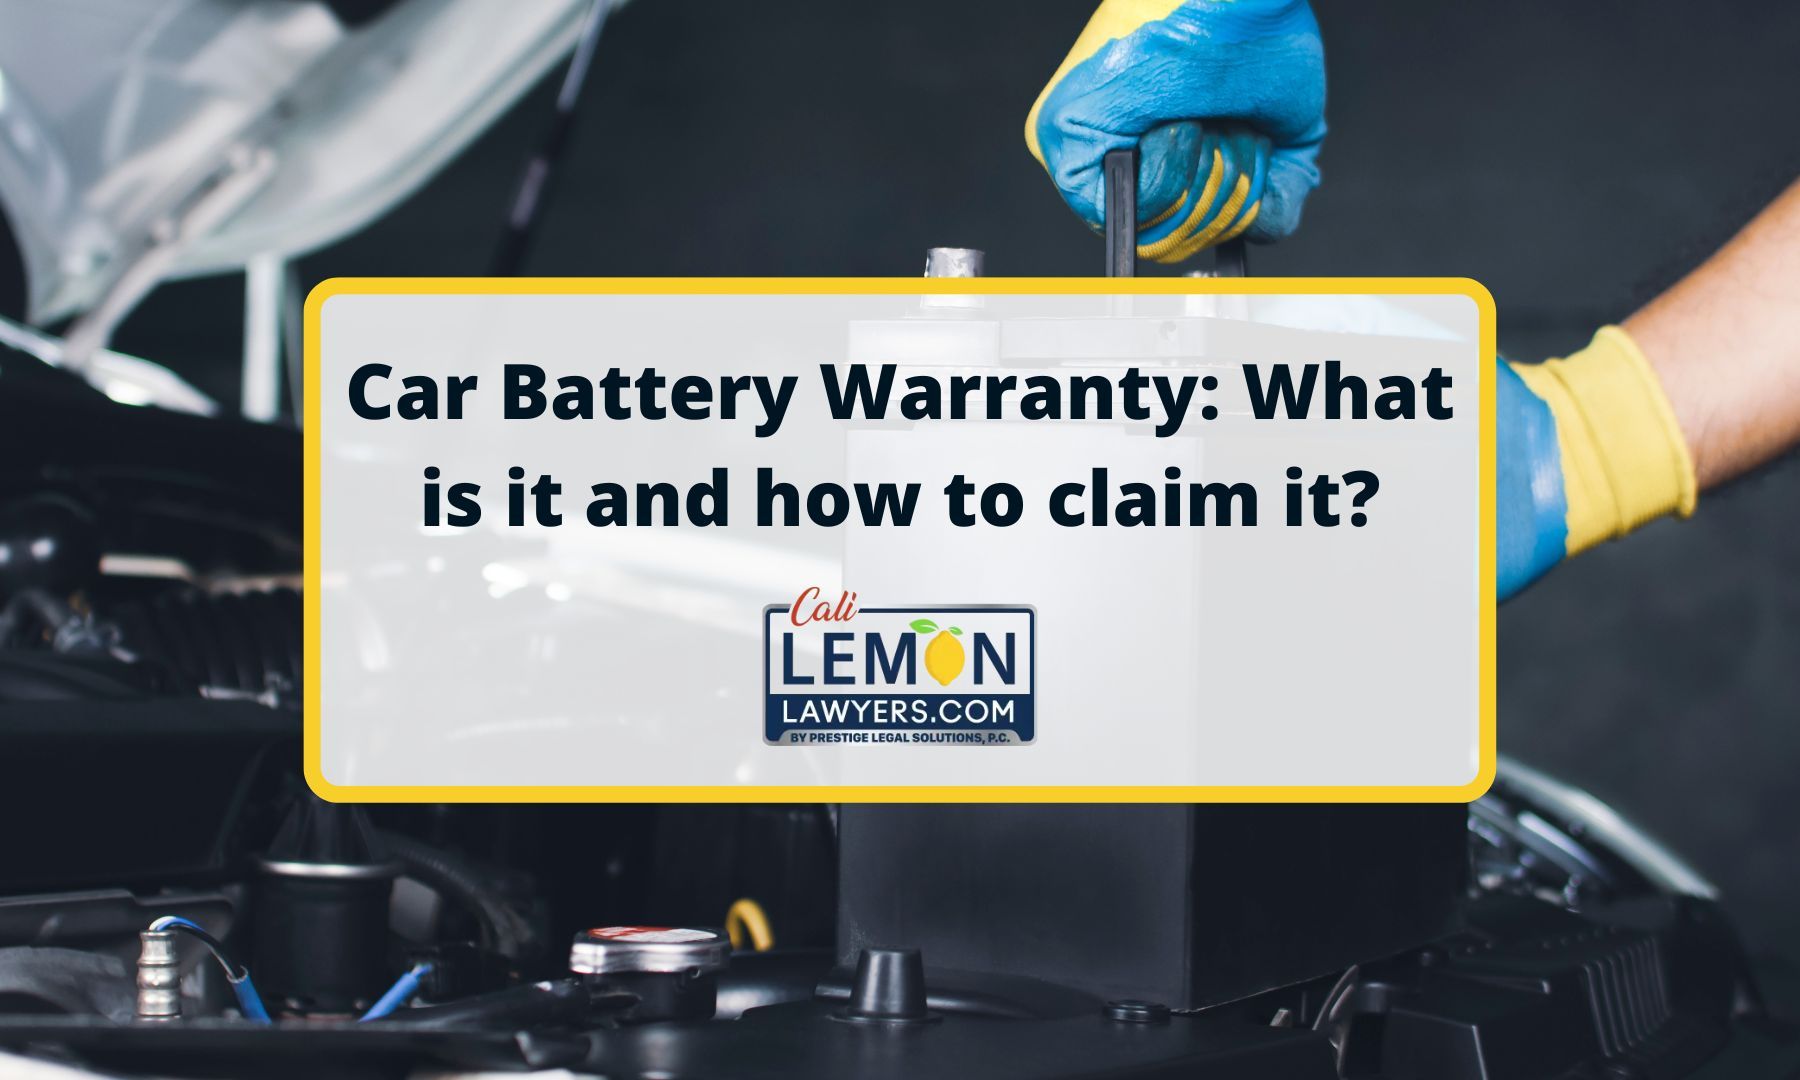 Car Battery Warranty: What is it and how to claim it?